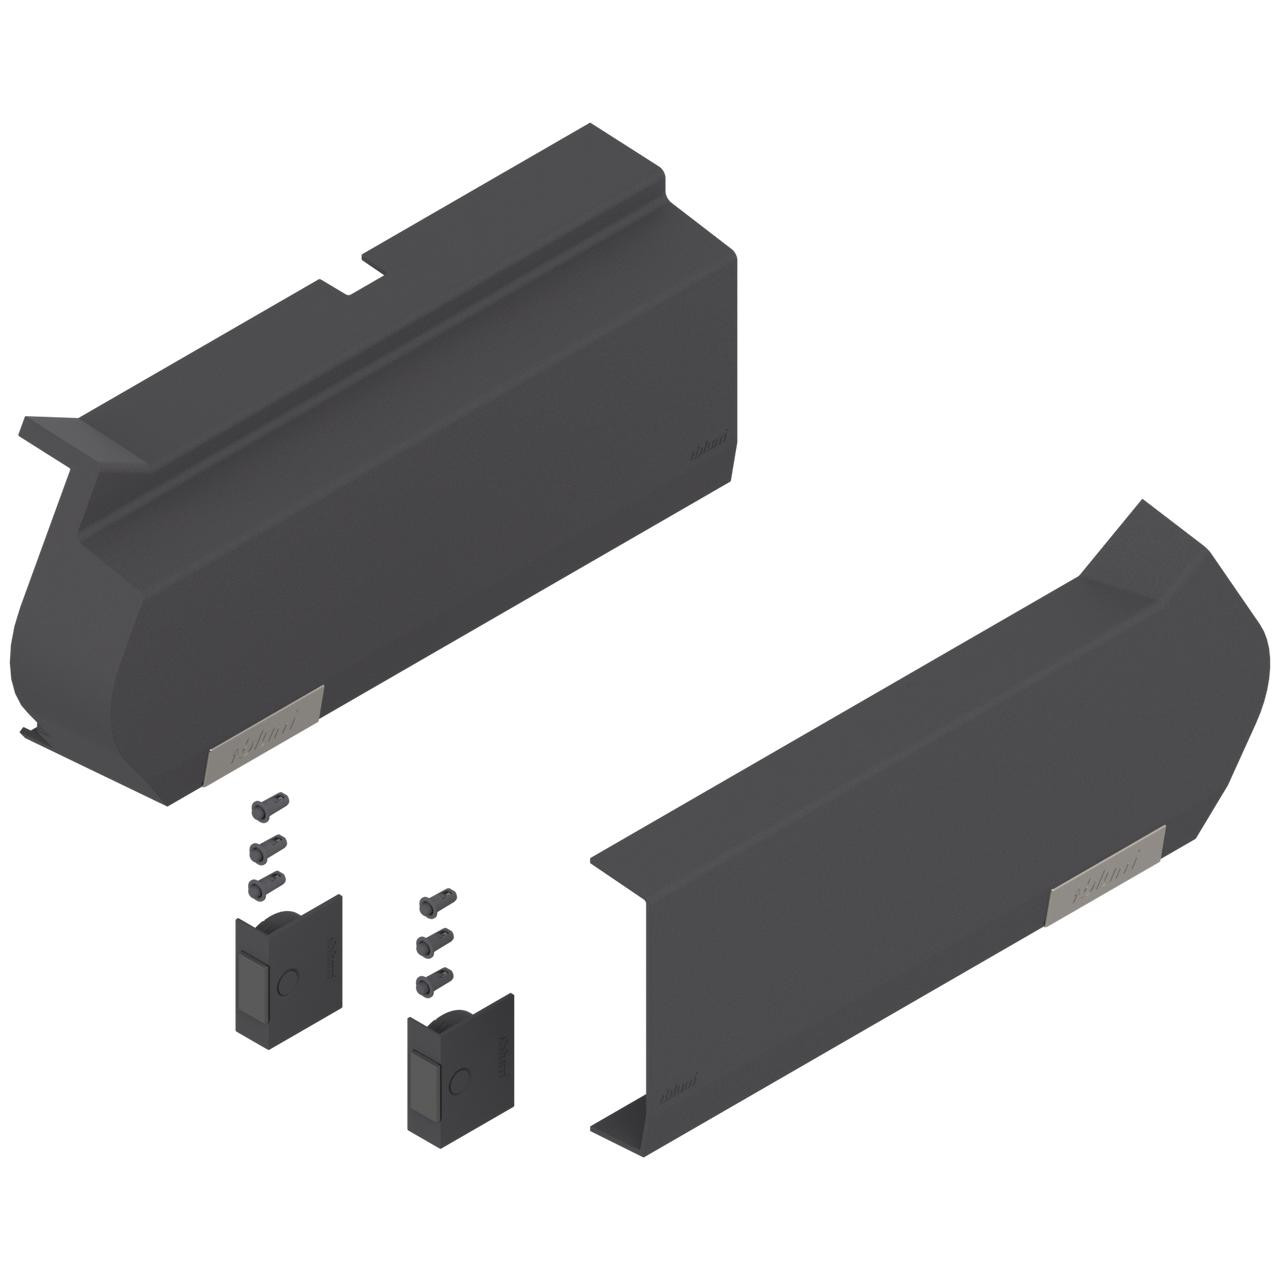  Blum 21F8020.NA Servo Drive Cover Cap and Switch assembly for Aventos  HF 3 Finishes 